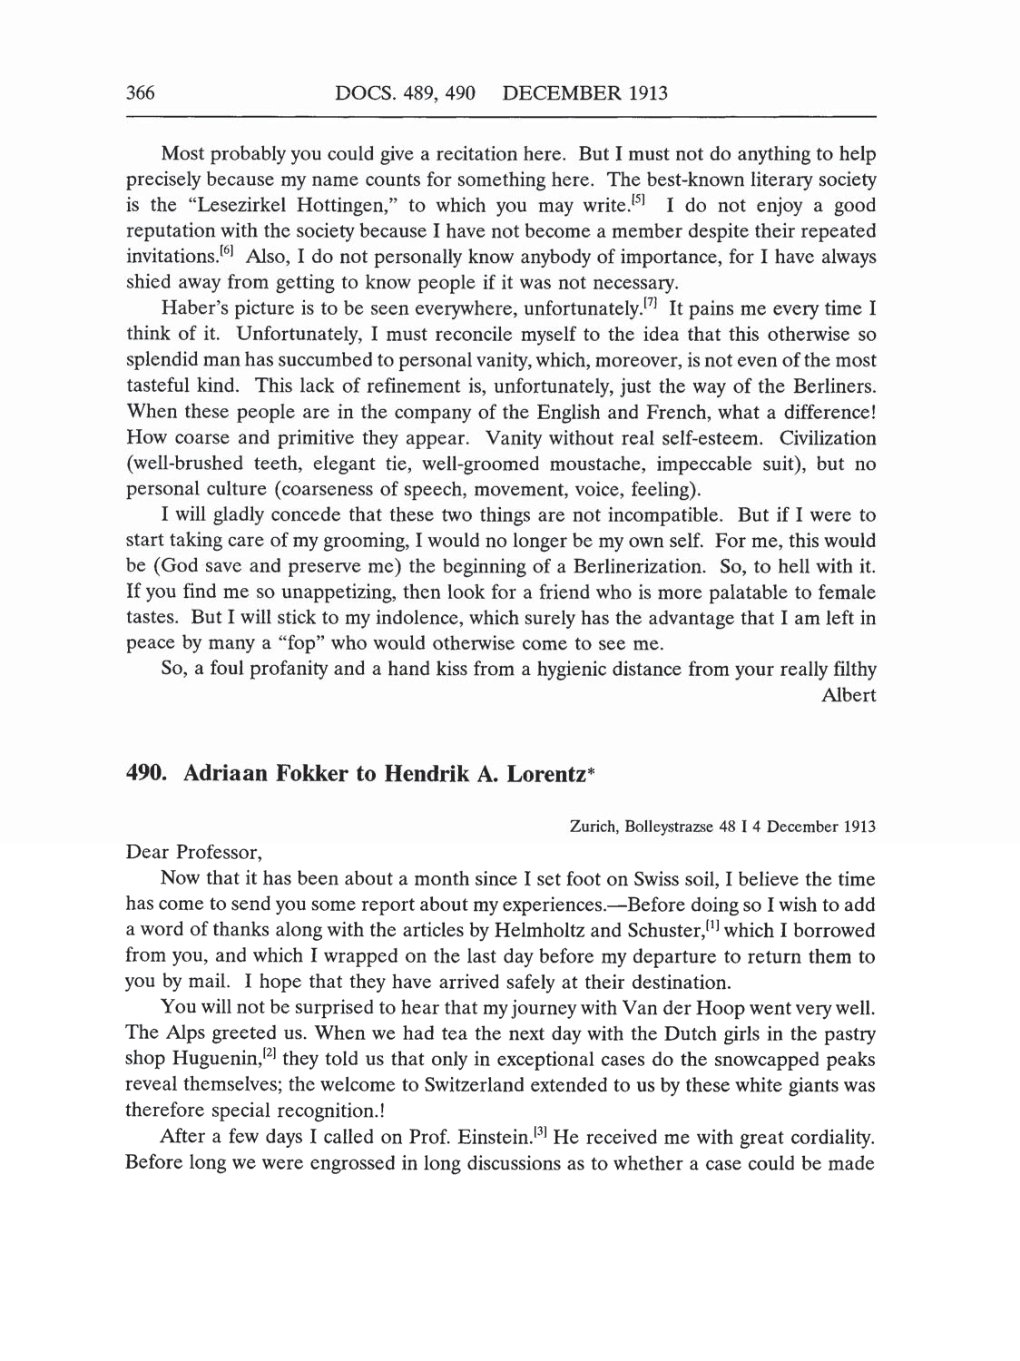 Volume 5: The Swiss Years: Correspondence, 1902-1914 (English translation supplement) page 366